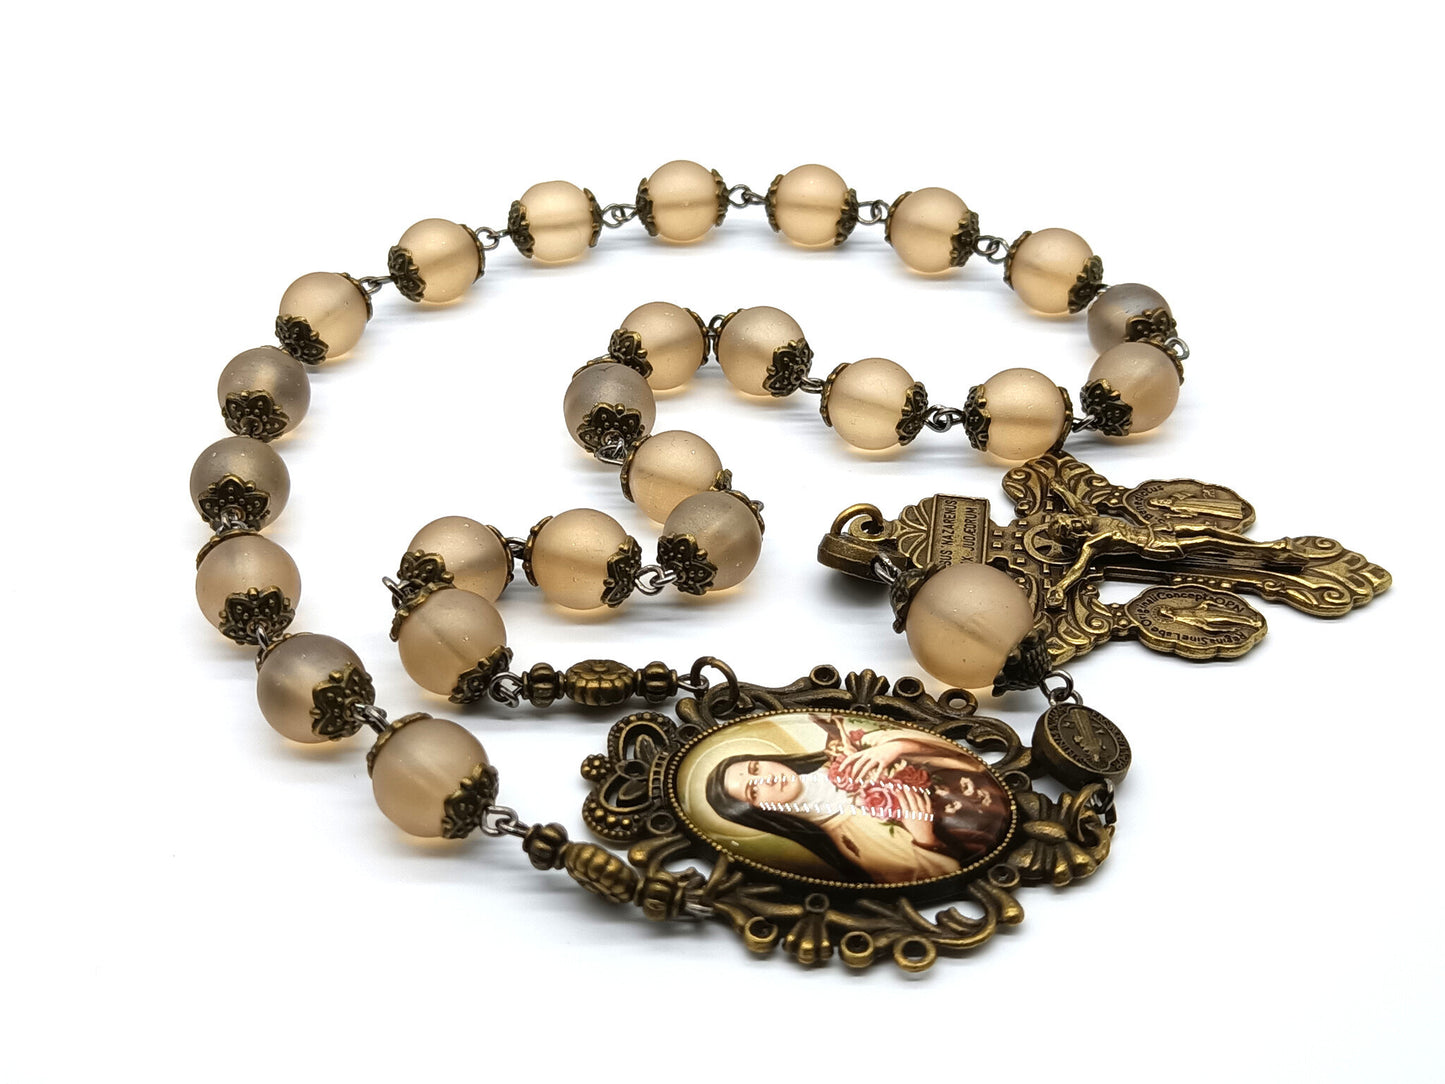 Saint Therese unique rosary beads prayer chaplet with glass beads, bronze Pardon crucifix and centre picture medal.